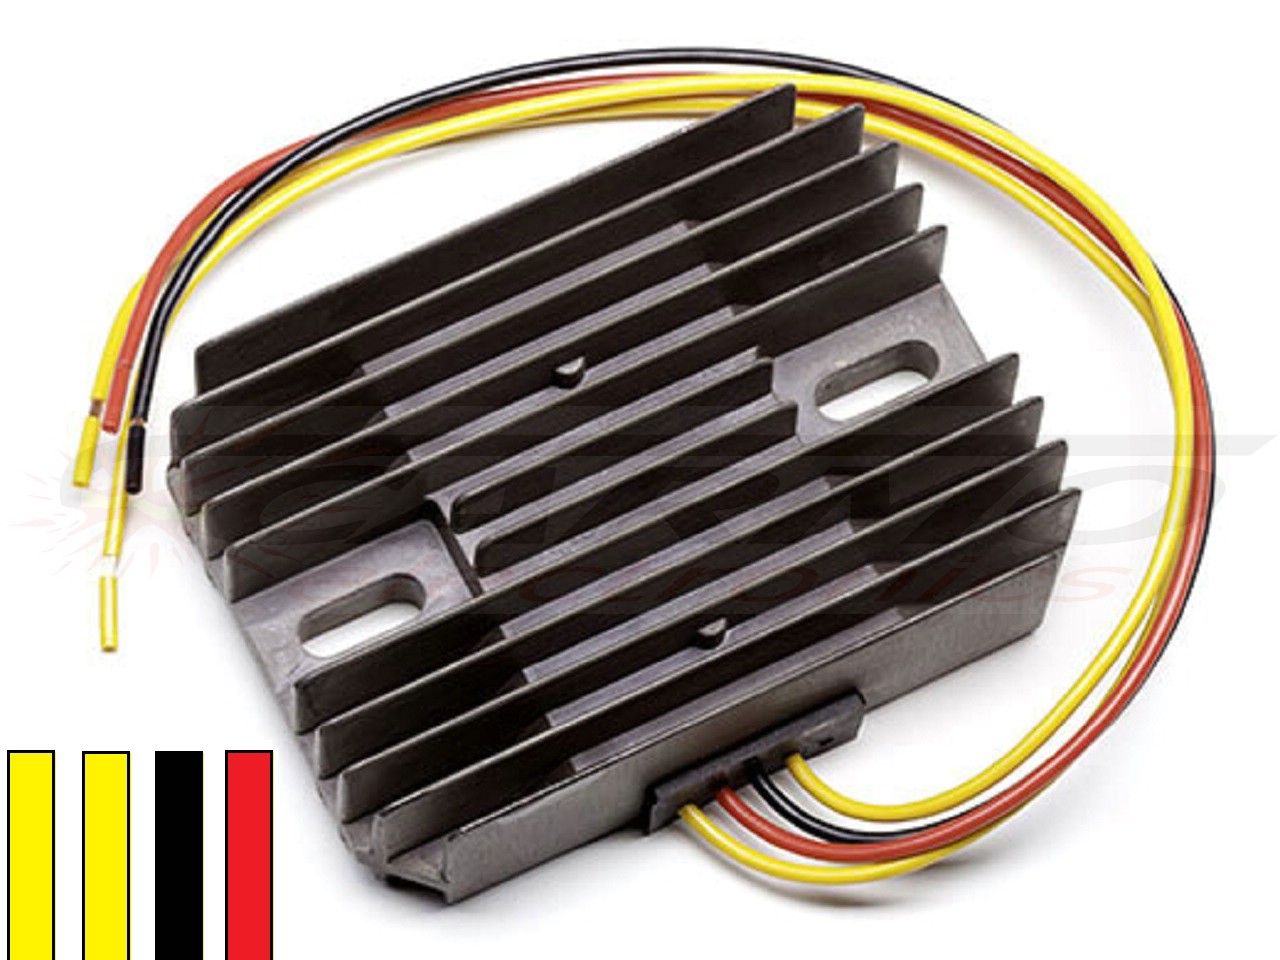 CARR801 Harley MOSFET Voltage regulator rectifier - Click Image to Close